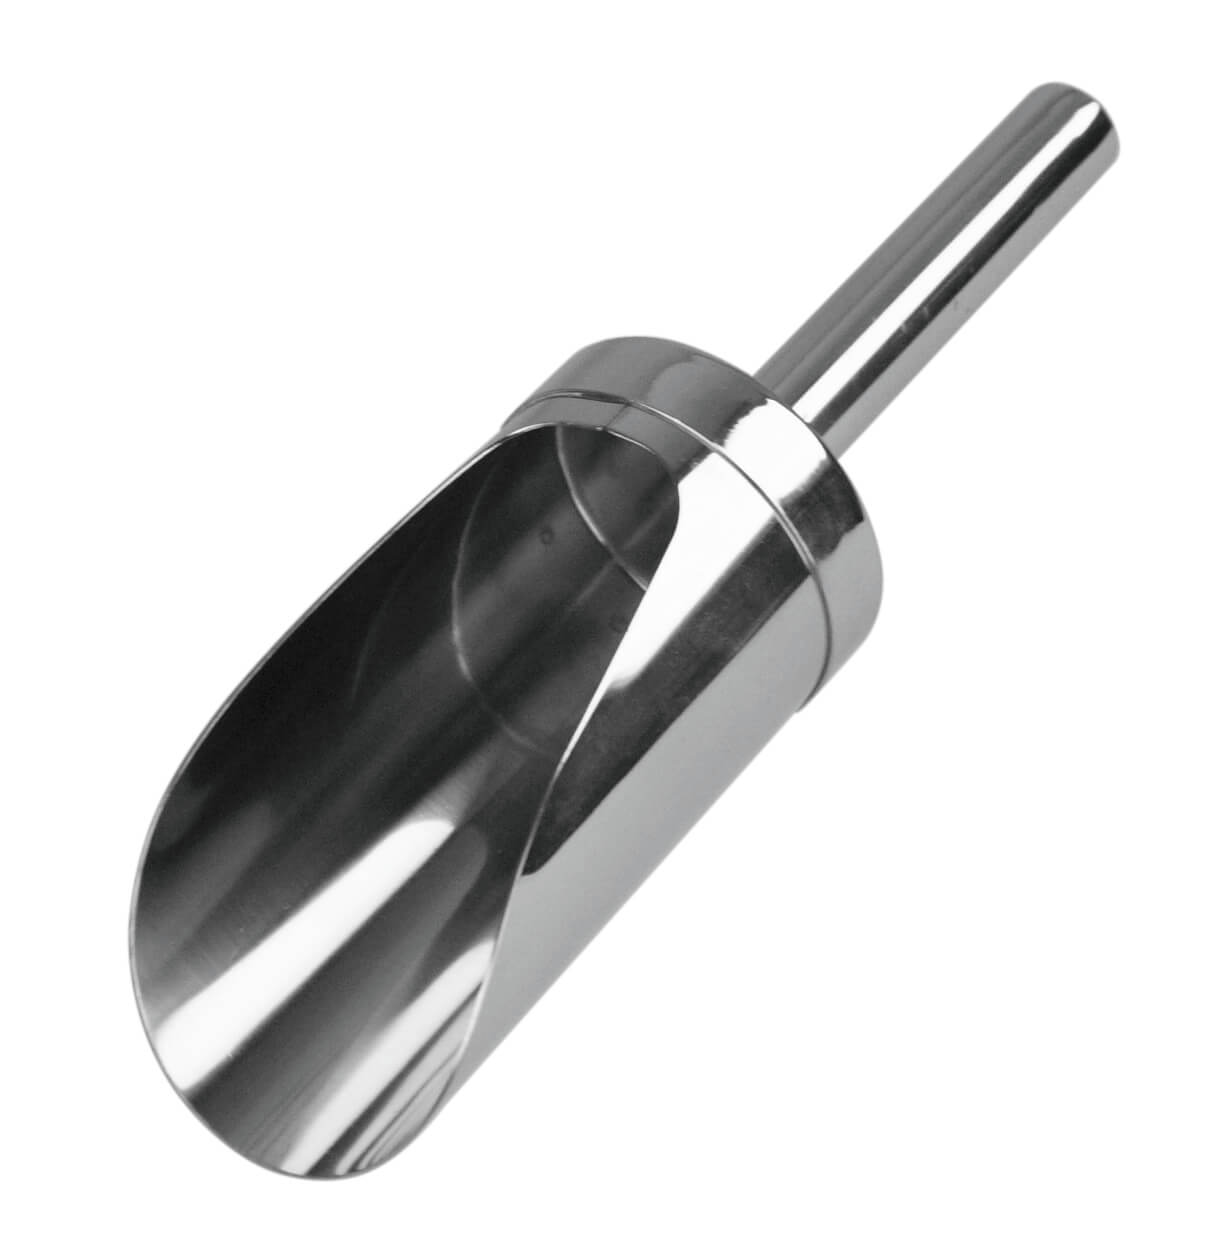 Ice scoop - stainless steel, without holes